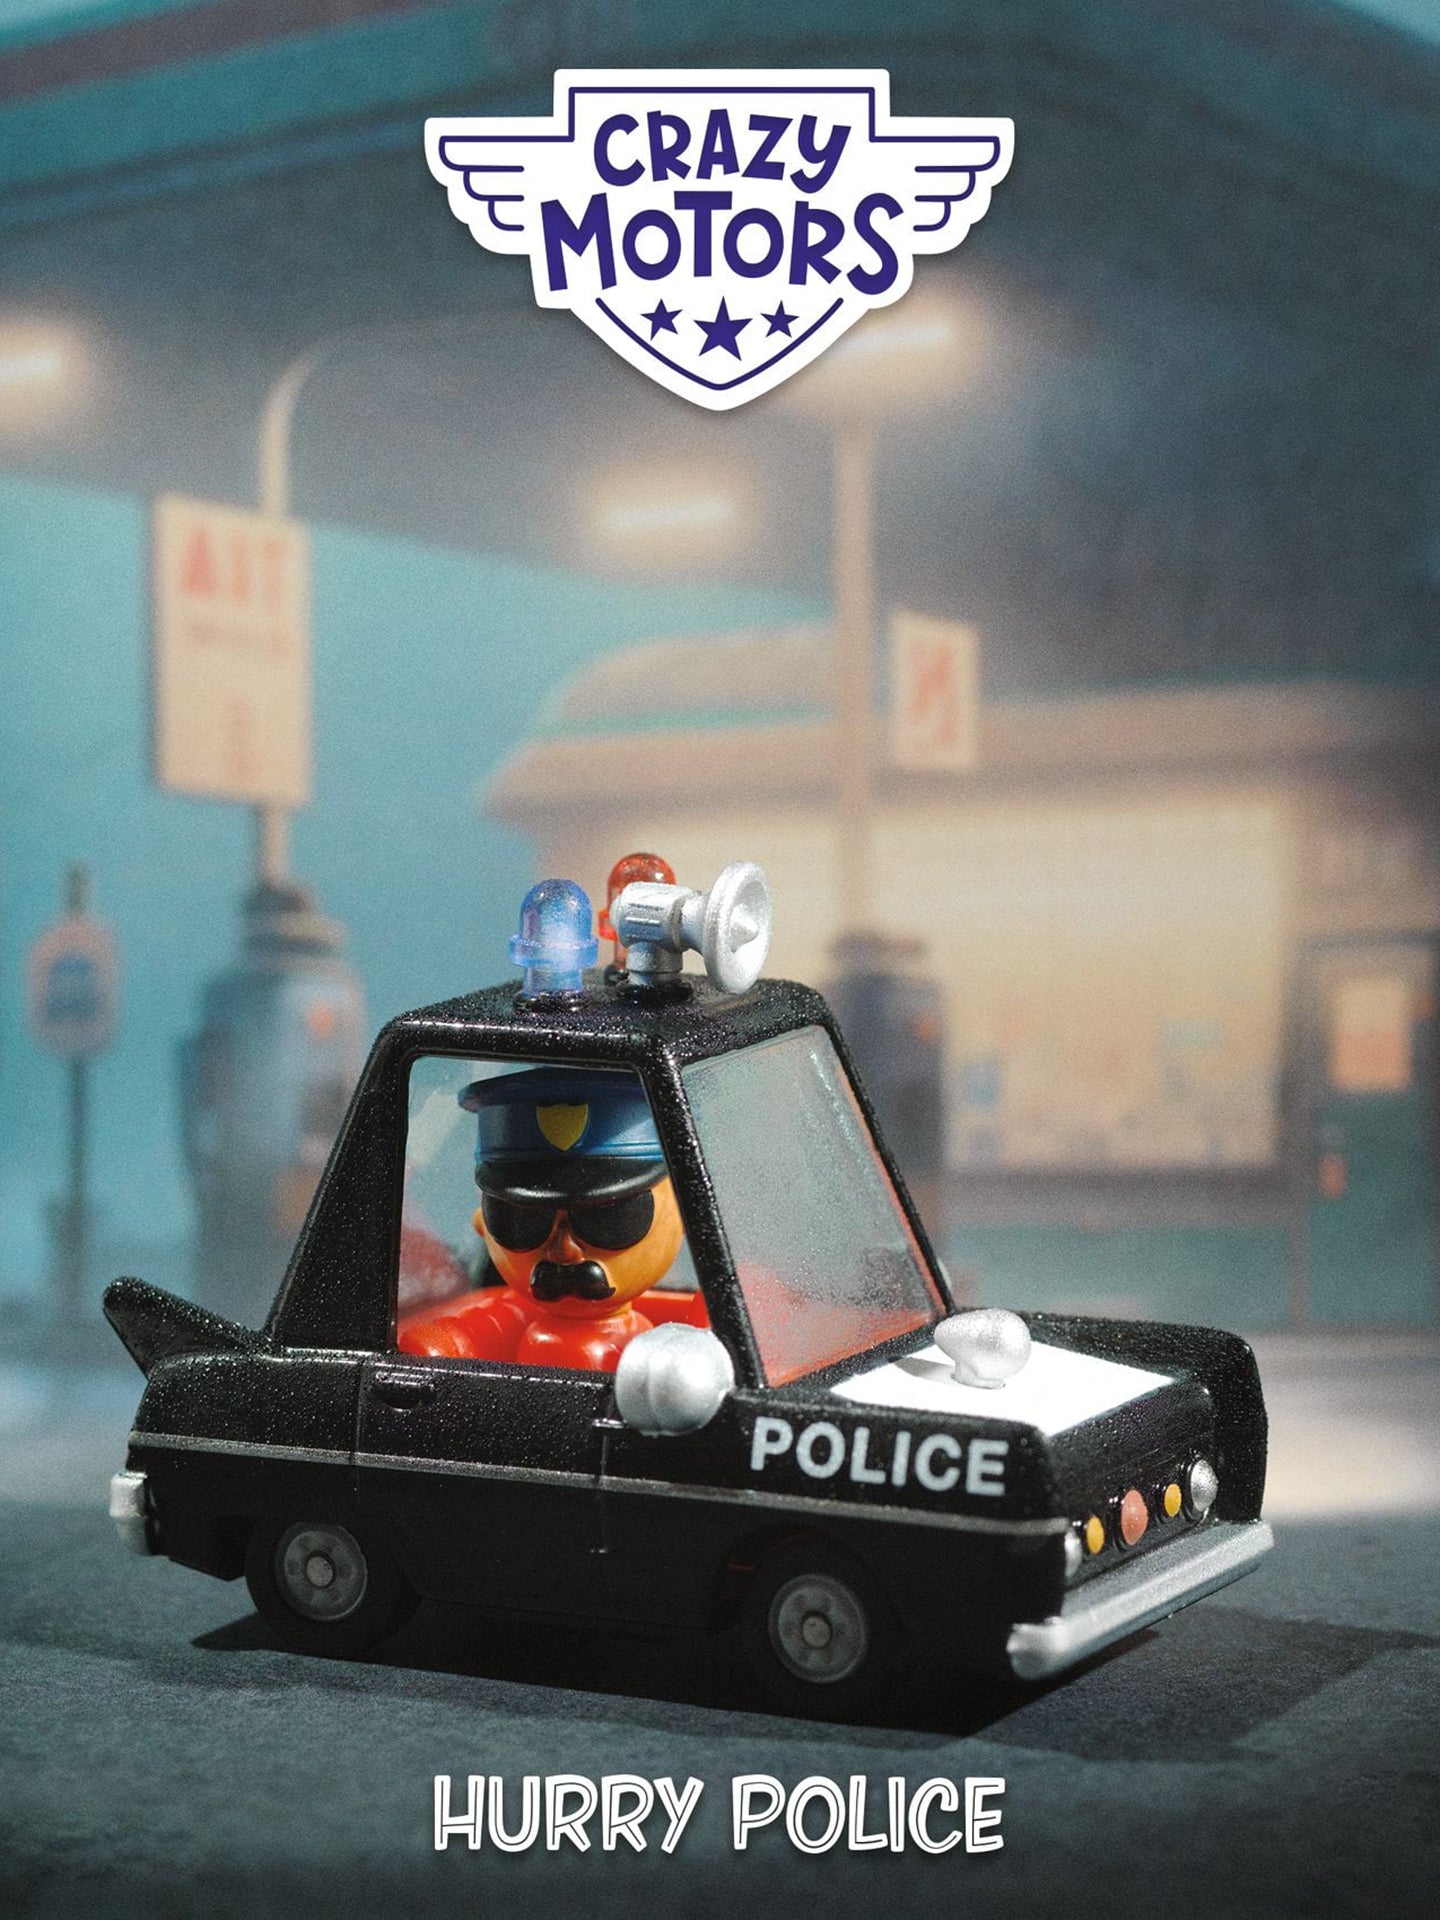 Hurry Police (Crazy motors collection)